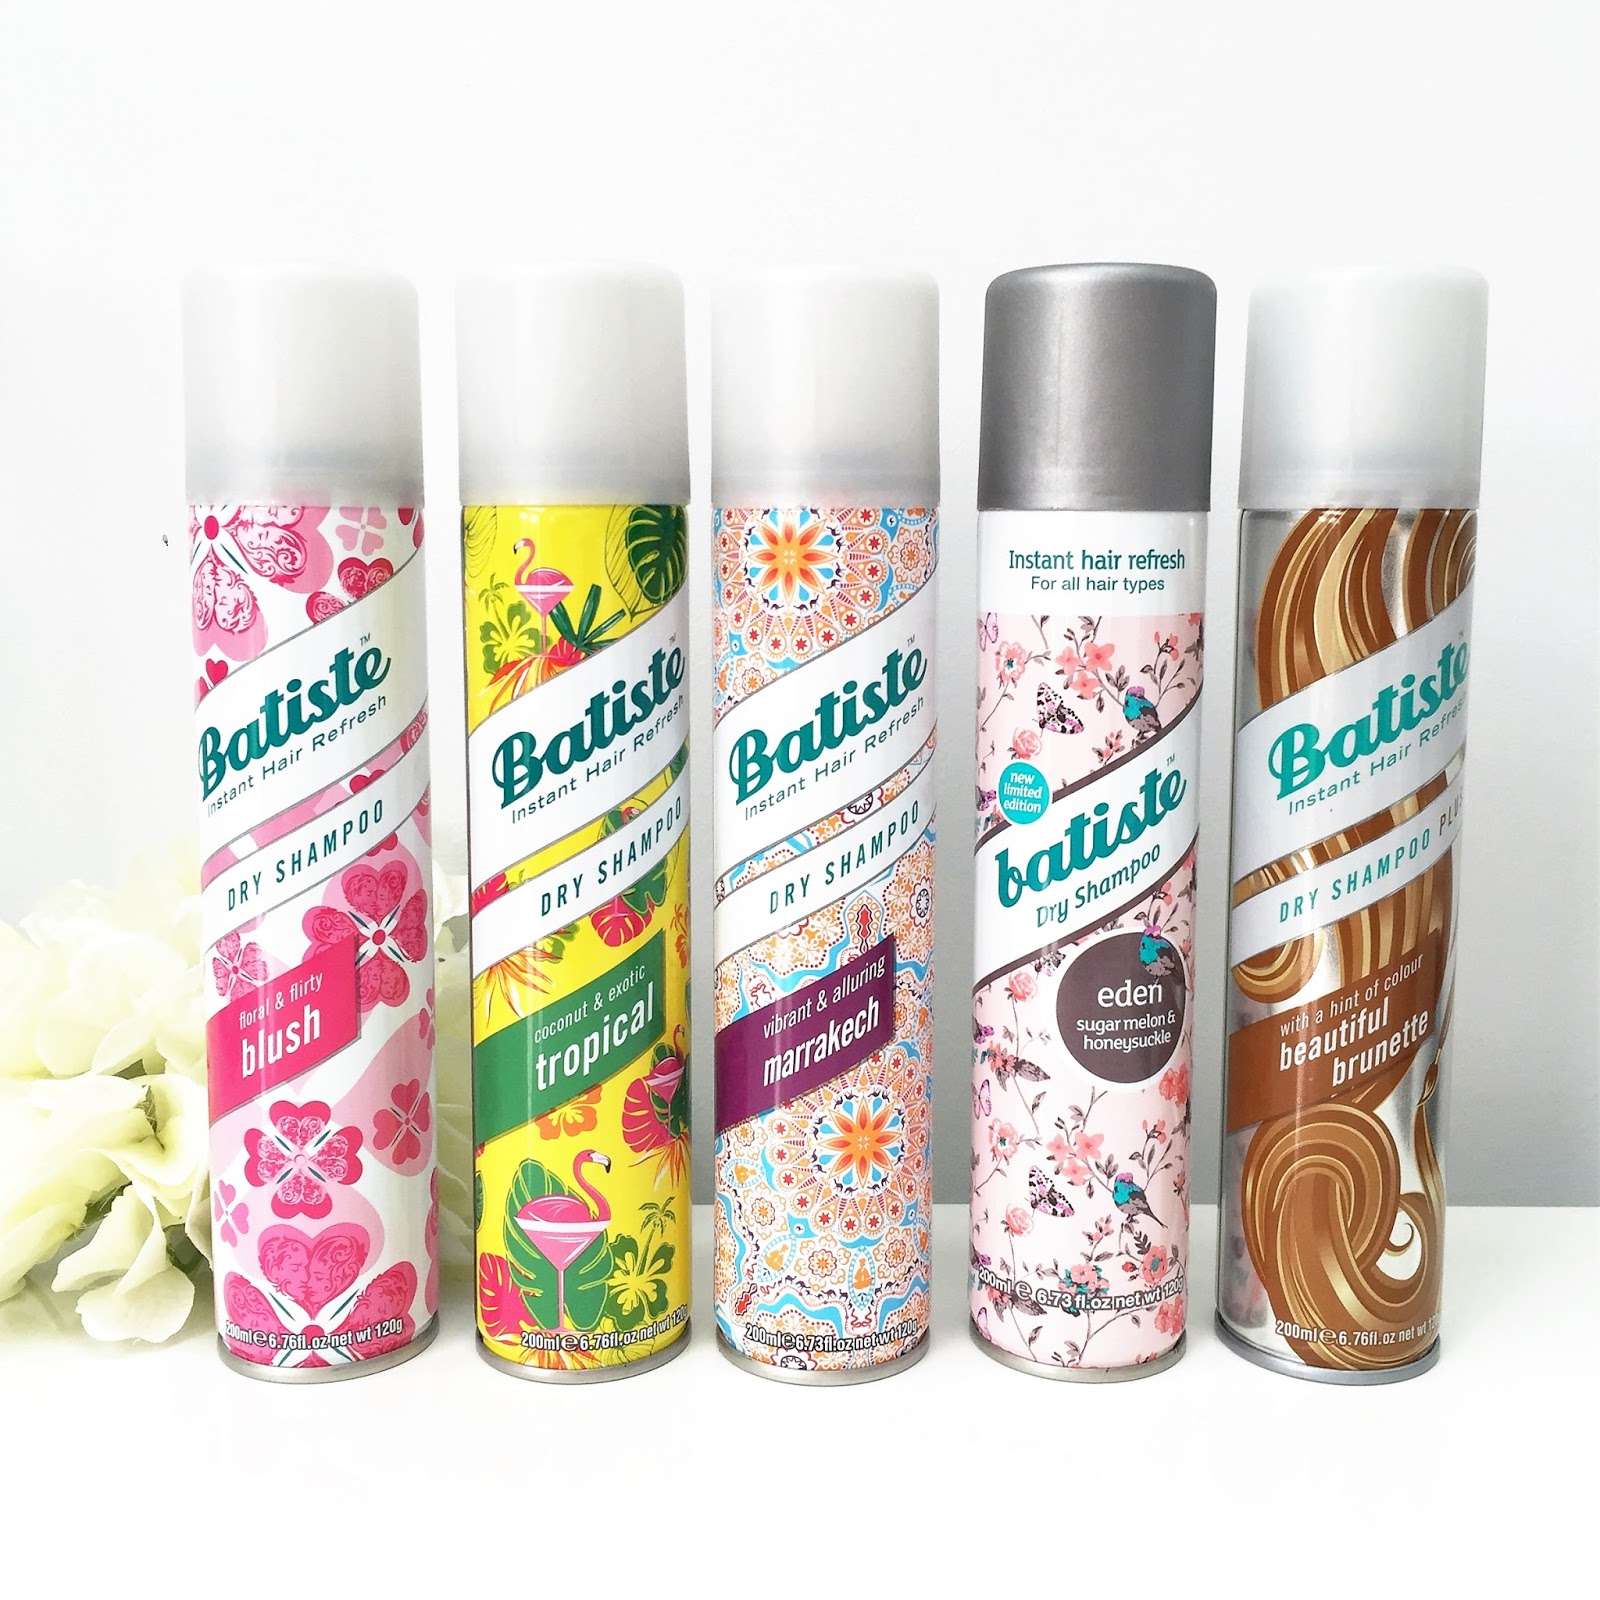 PRODUCT REVIEW: BATISTE DRY SHAMPOO NEW PRODUCT LAUNCHES | Beauty & Lifestyle Hunter